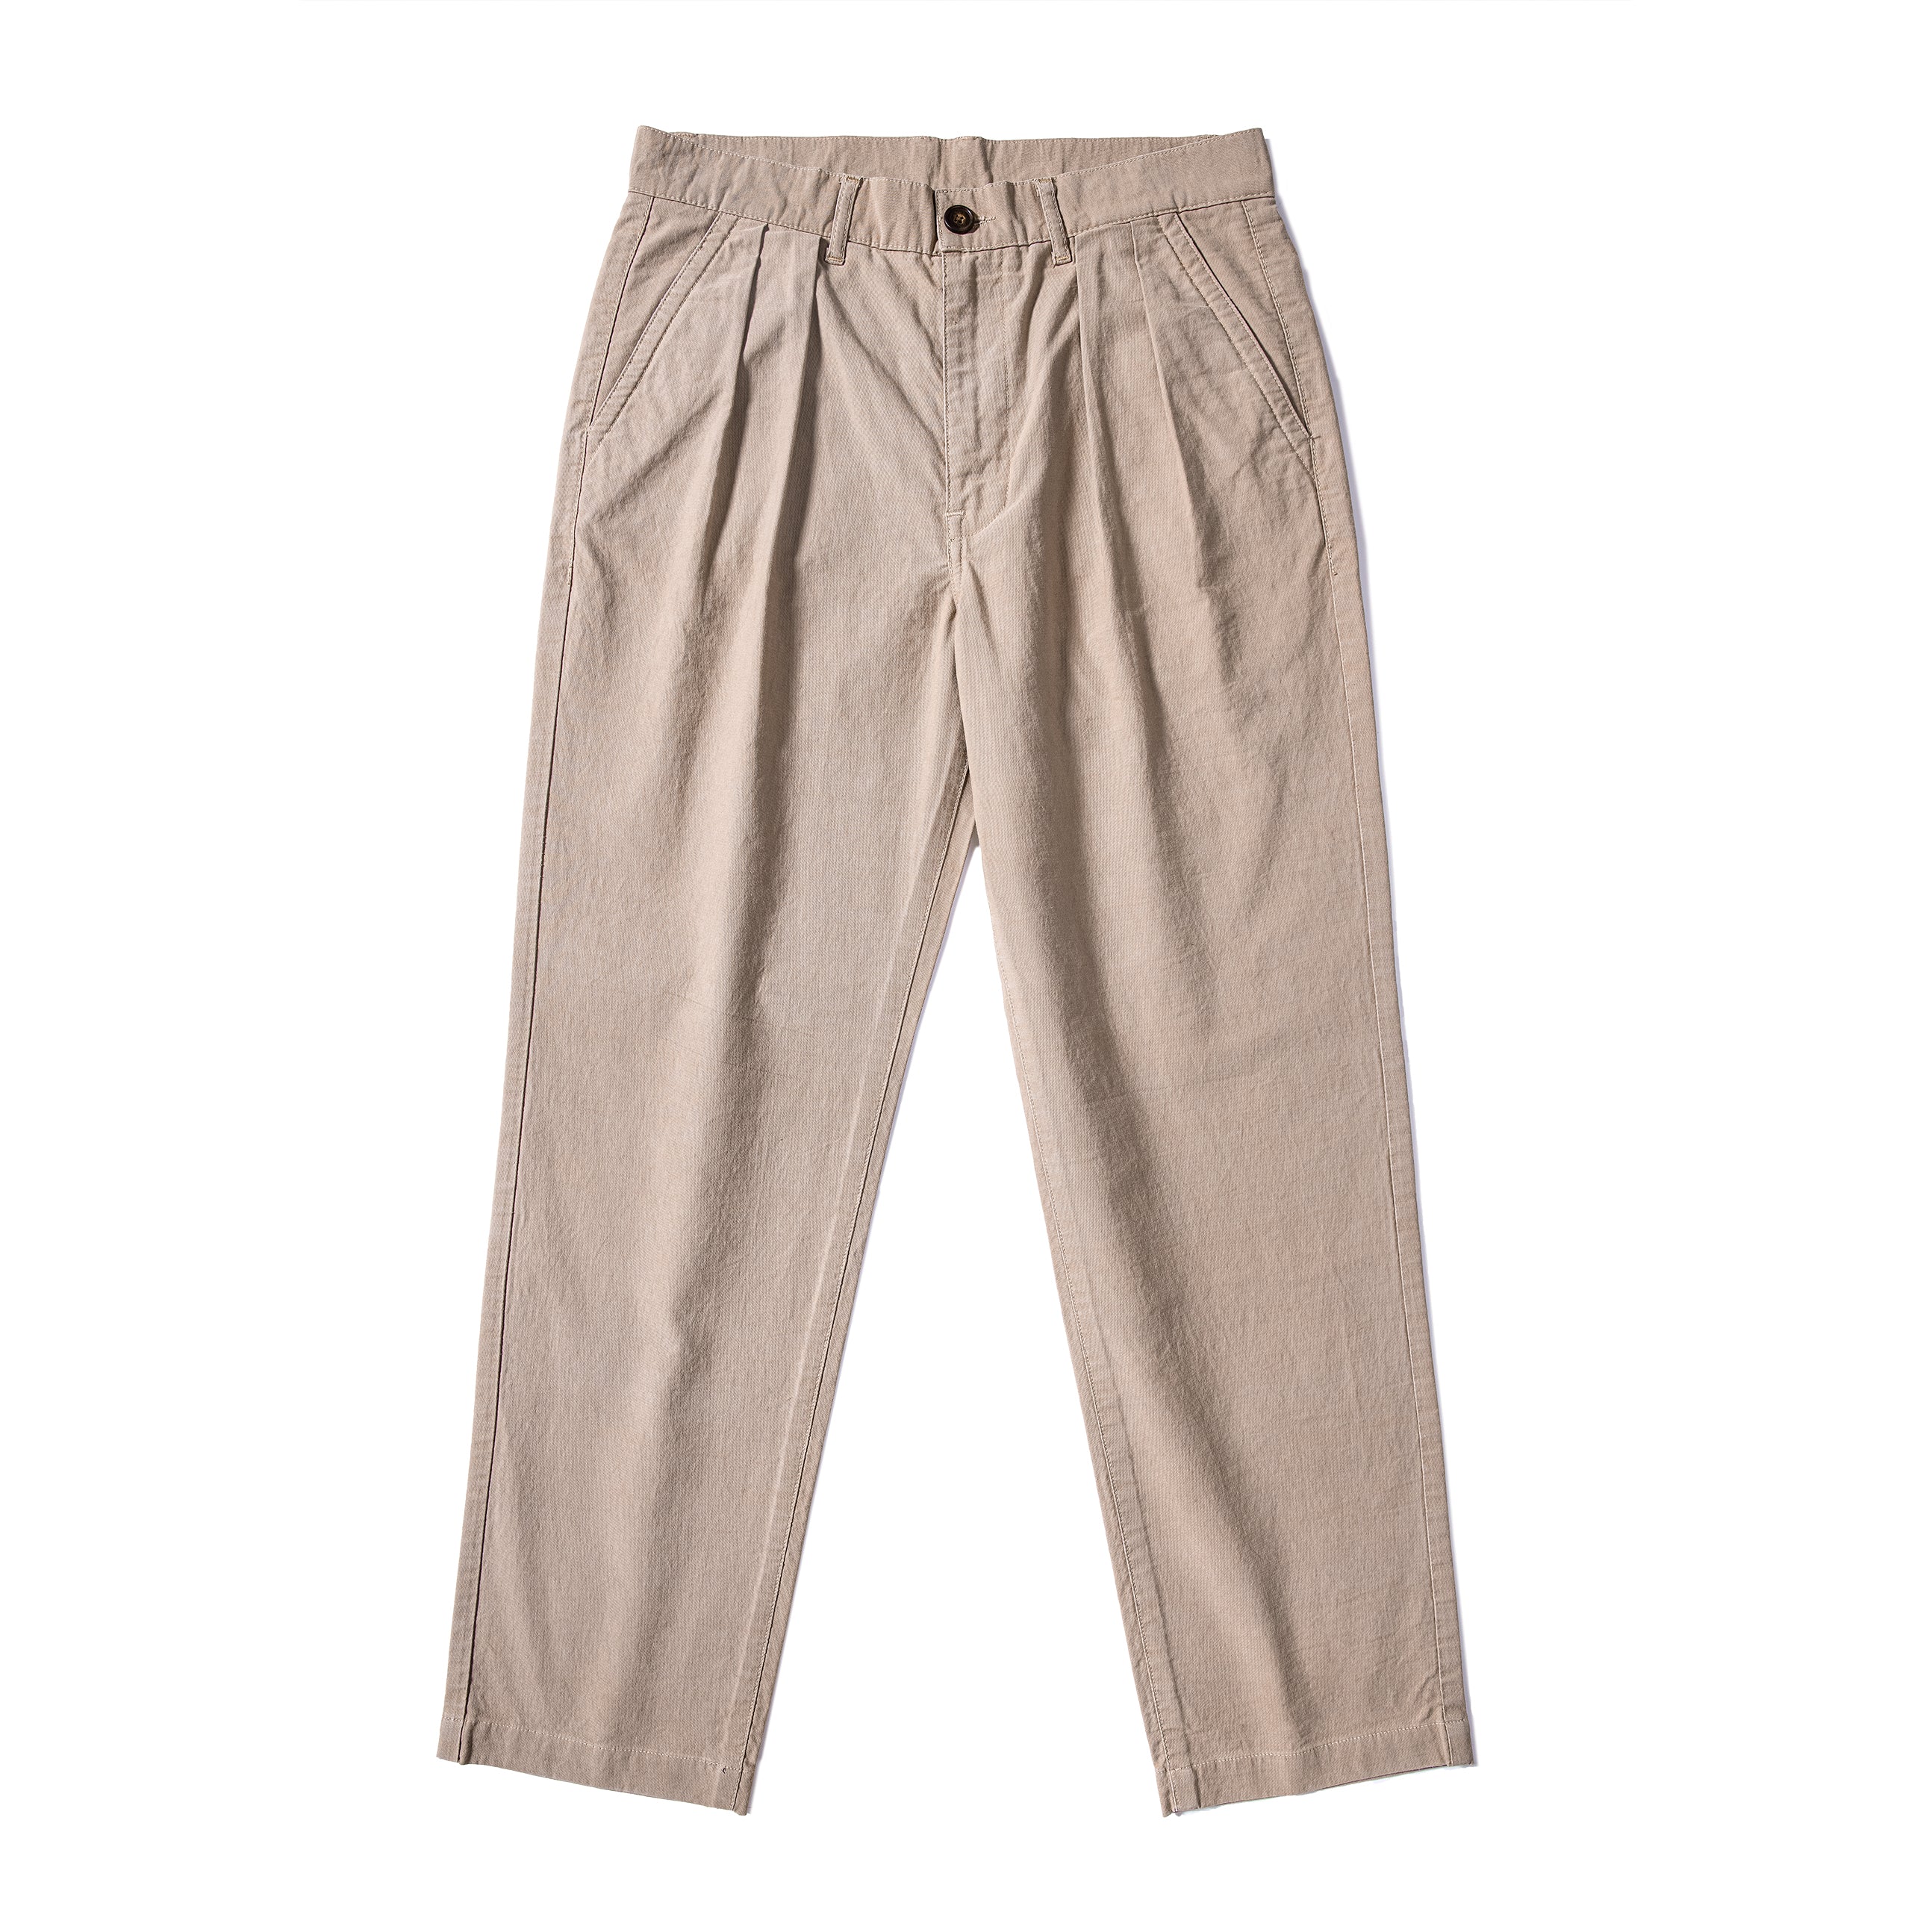 Retro Style for Autumn Winter Ami Red Wind Chino Pants